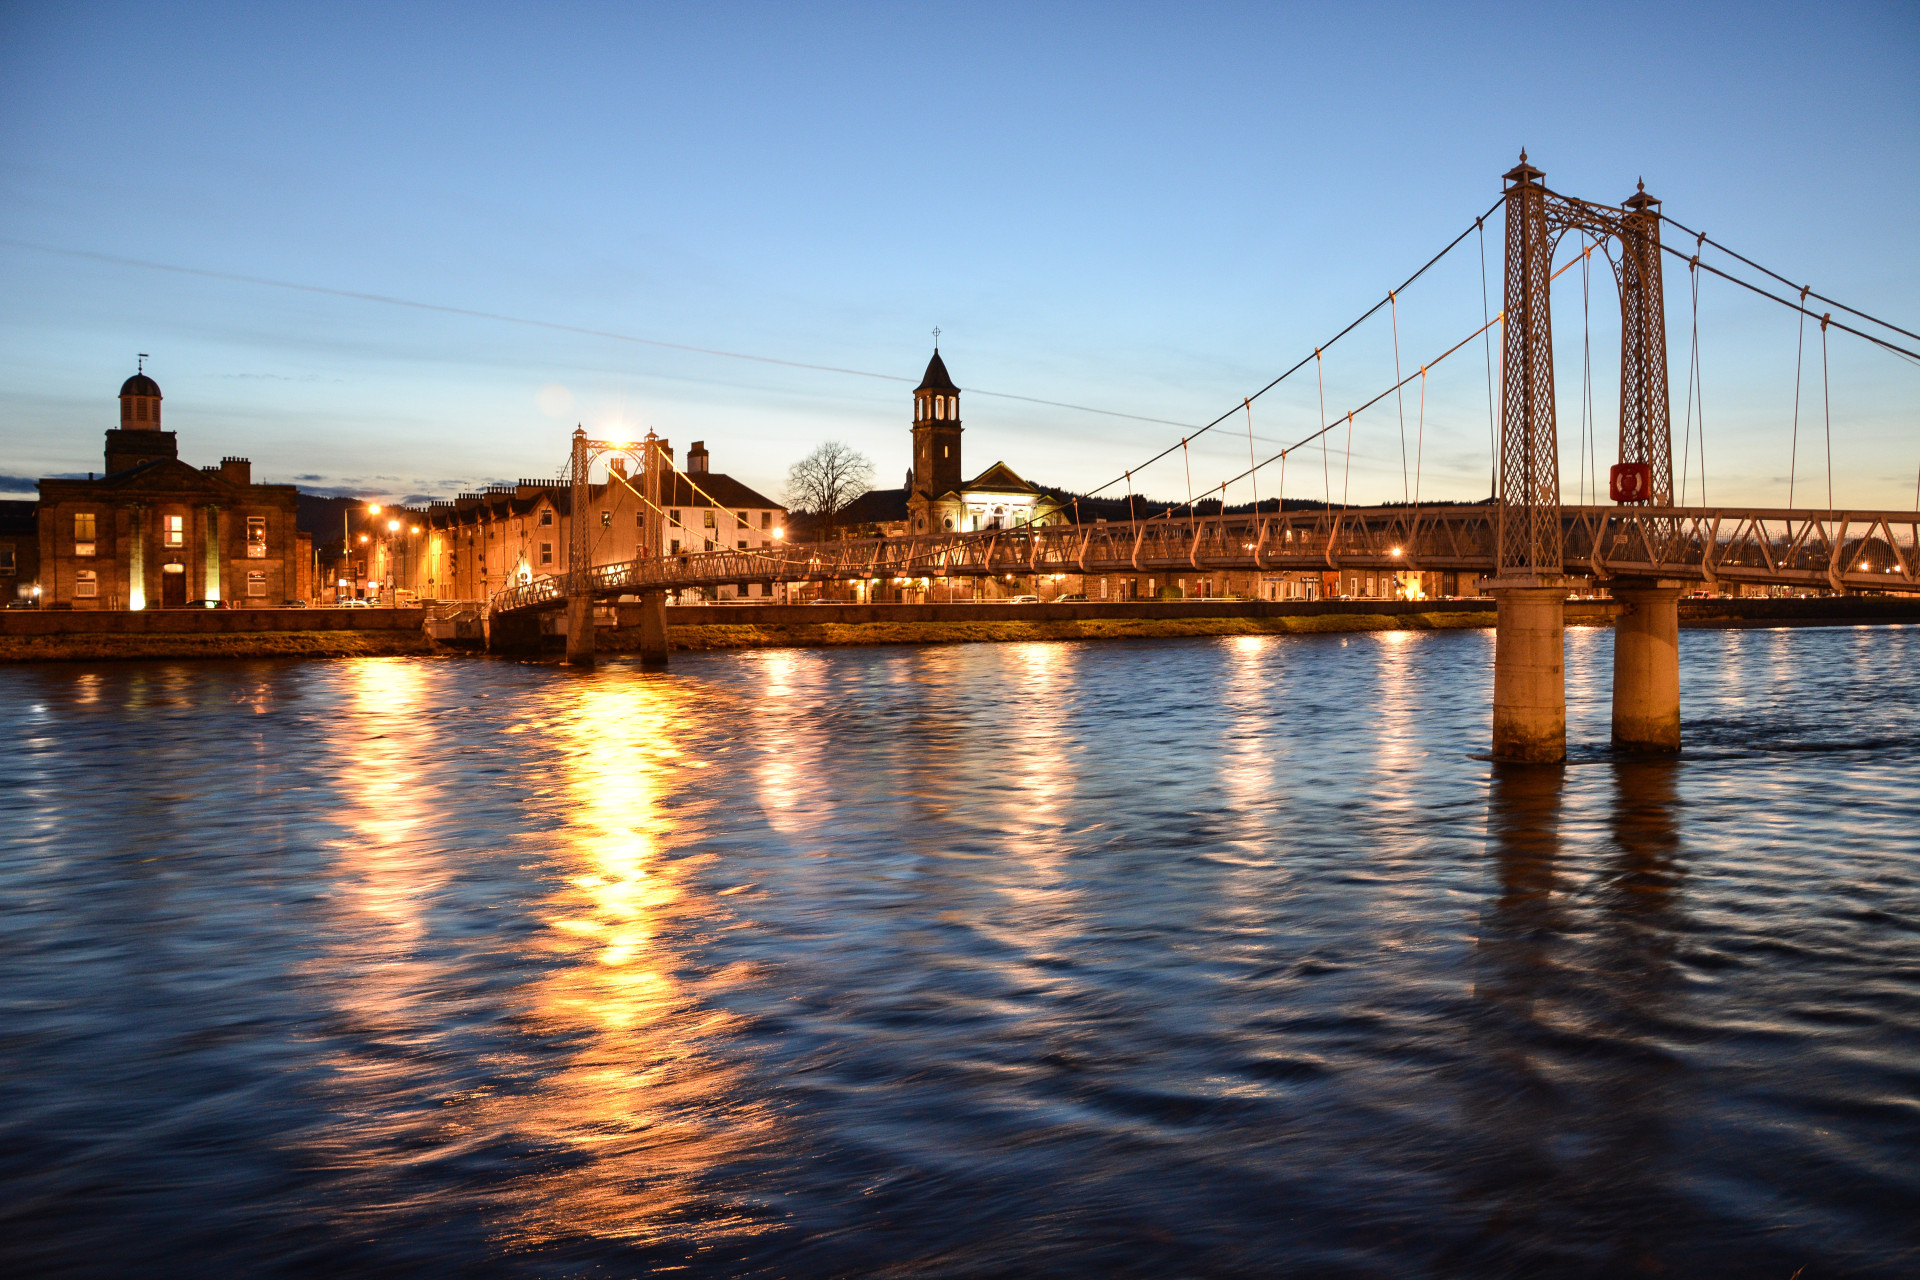 The city of Inverness marks both the starting and finishing point.<p><a href="https://www.msn.com/en-us/community/channel/vid-7xx8mnucu55yw63we9va2gwr7uihbxwc68fxqp25x6tg4ftibpra?cvid=94631541bc0f4f89bfd59158d696ad7e">Follow us and access great exclusive content every day</a></p>